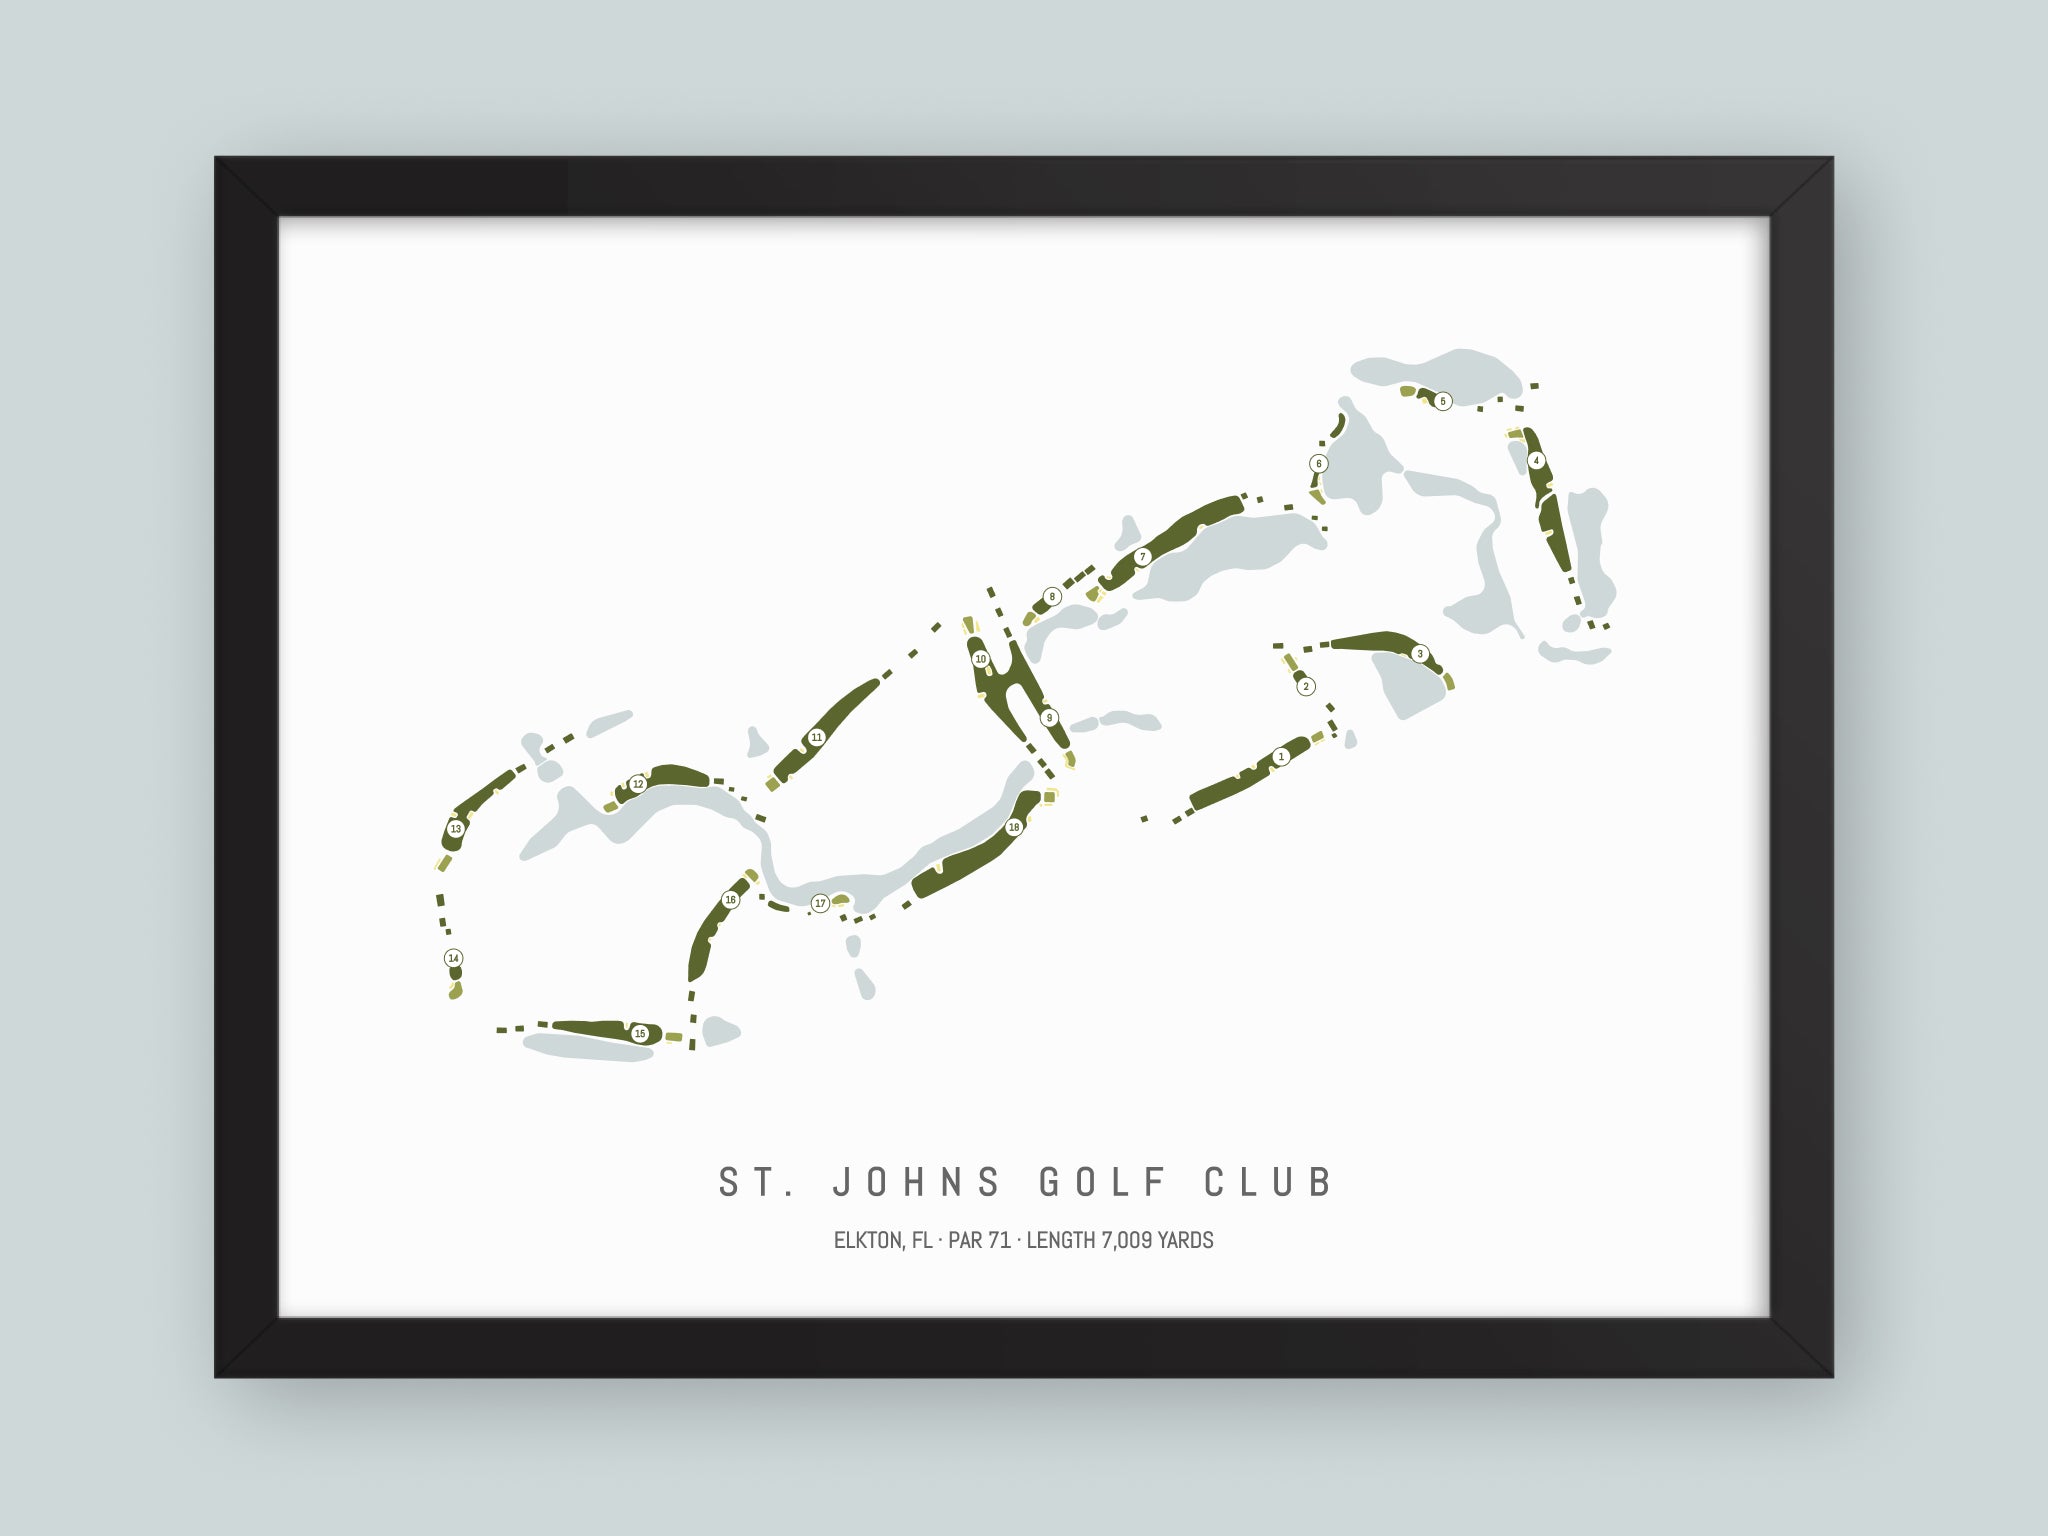 St-Johns-Golf-Club-FL--Black-Frame-24x18-With-Hole-Numbers